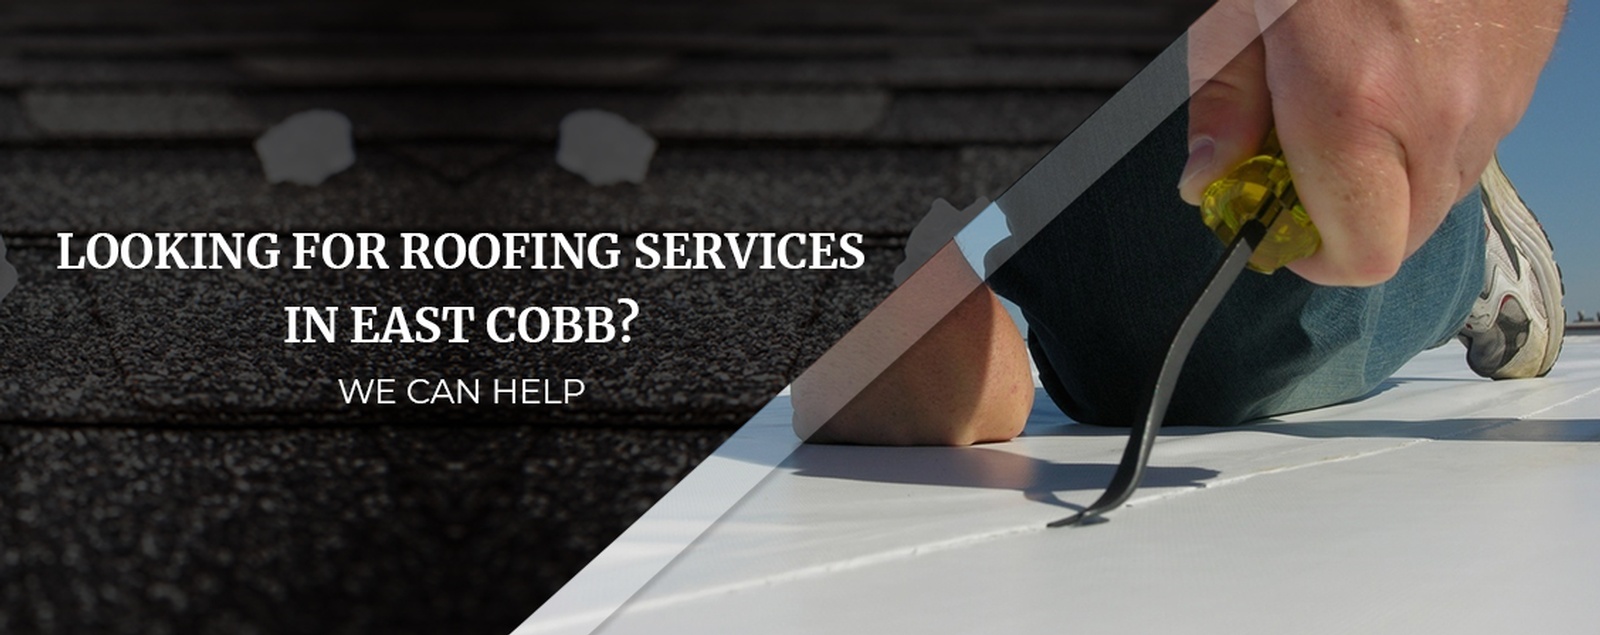 Looking For Roofing Services In East Cobb We Can Help